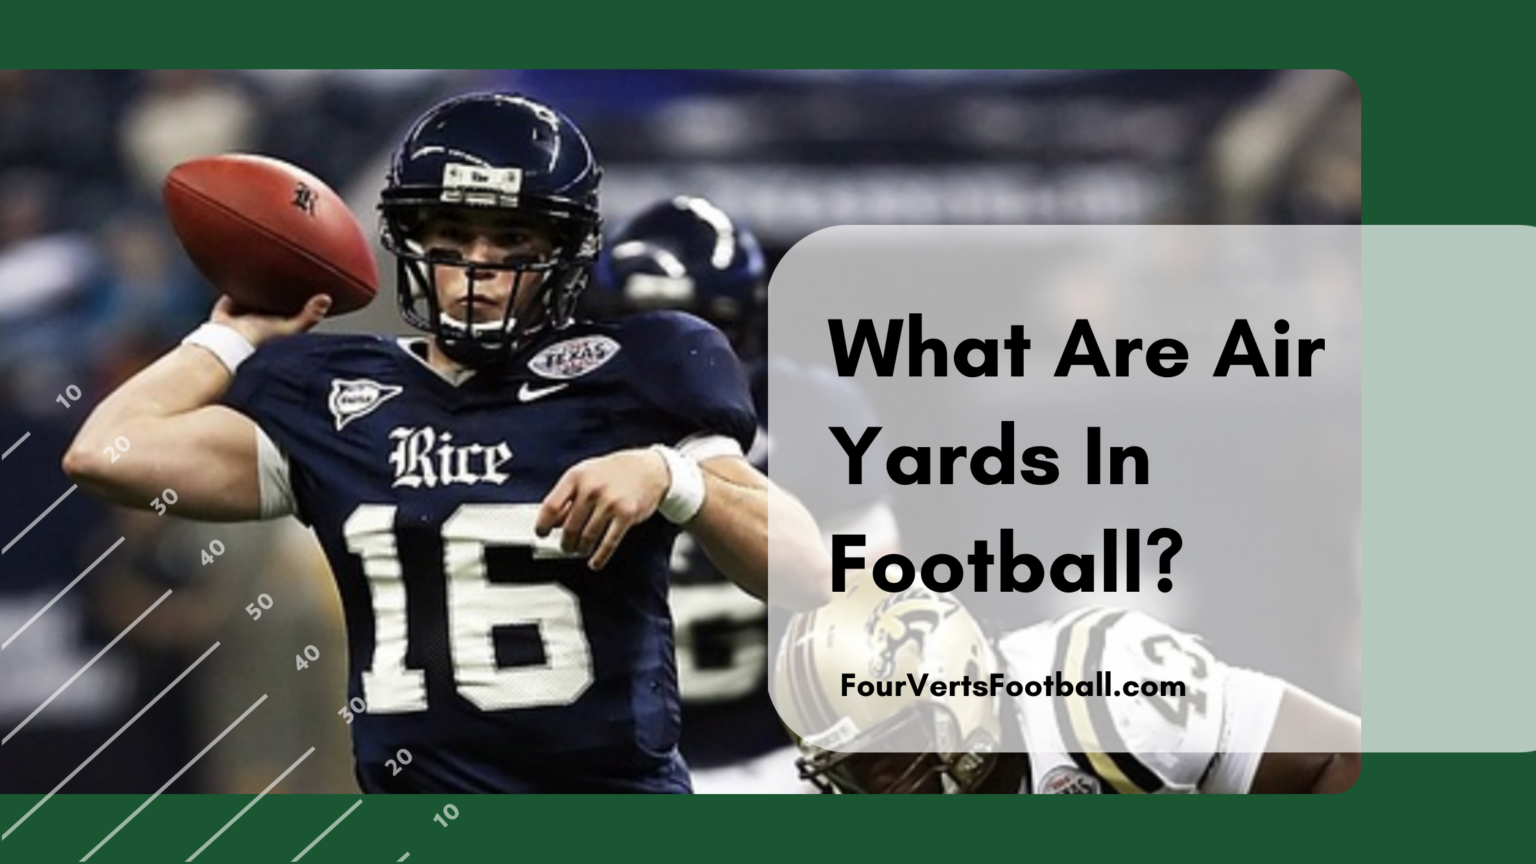 What Are Air Yards In Football? Four Verts Football